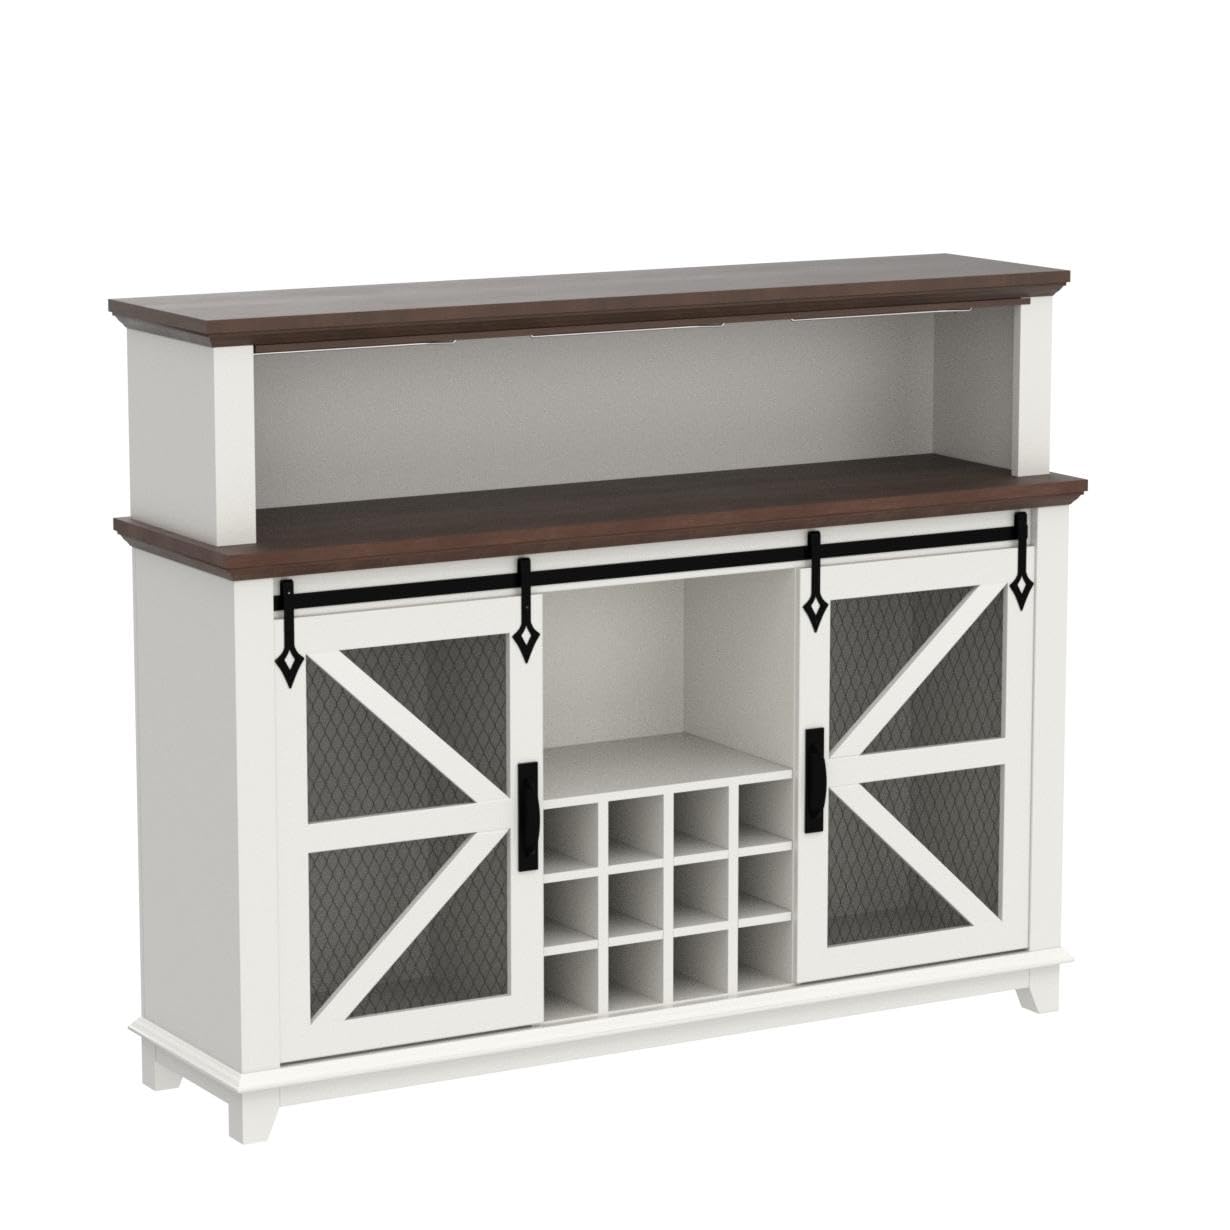 OKD Farmhouse Coffee Bar Cabinet with LED Lights, 55" Sideboard Buffet Table w/Sliding Barn Door & Wine and Glass Rack, Home Liquor Bar w/Storage Shelves for Dining Room,Antique White